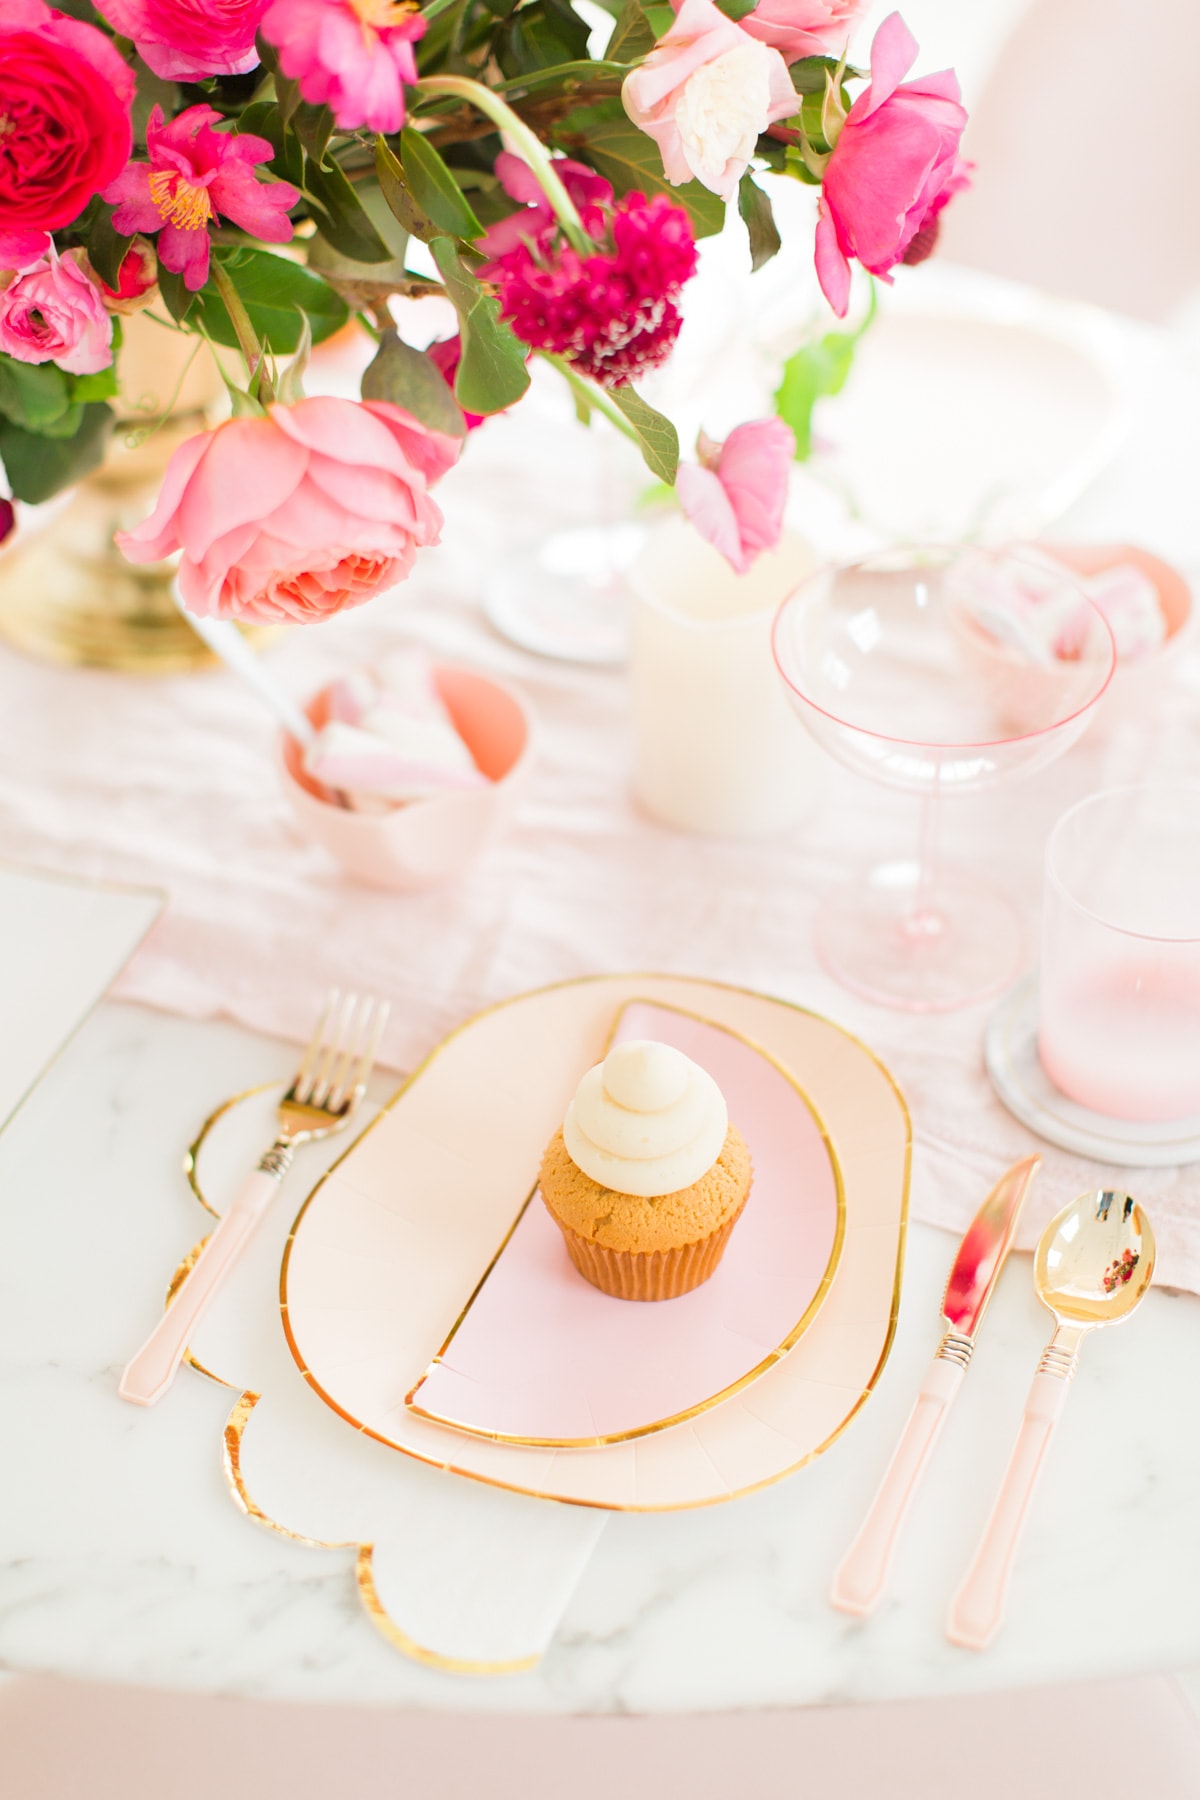 A Simple and Chic Galentine's Table by top Houston lifestyle blogger Ashley Rose of Sugar and Cloth